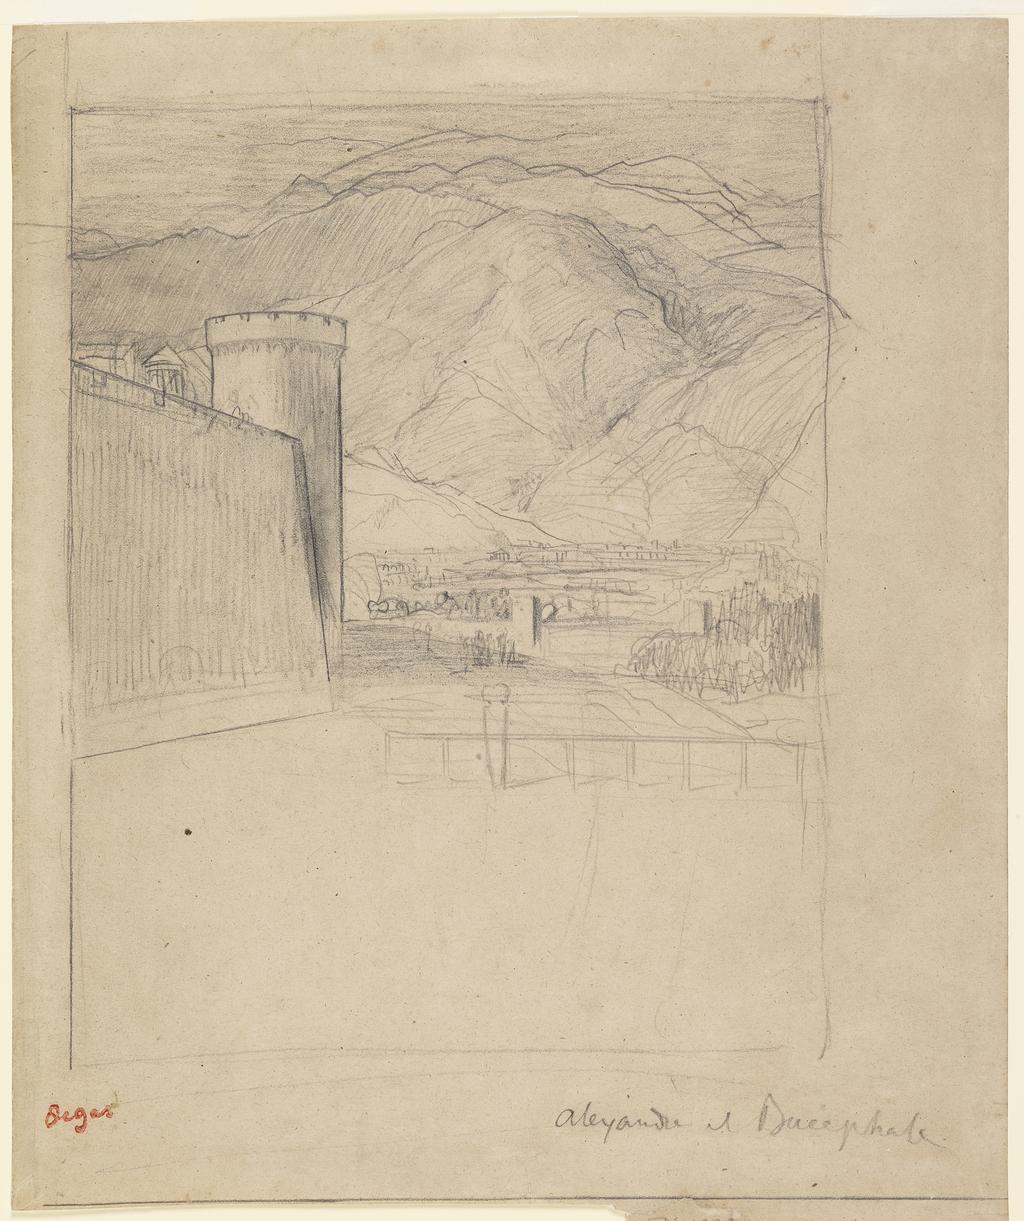 An image of Study for the landscape background of Alexander and Bucephalus. Degas, Edgar (French, 1834-1917). Graphite on paper, height 340 mm, width 274 mm.